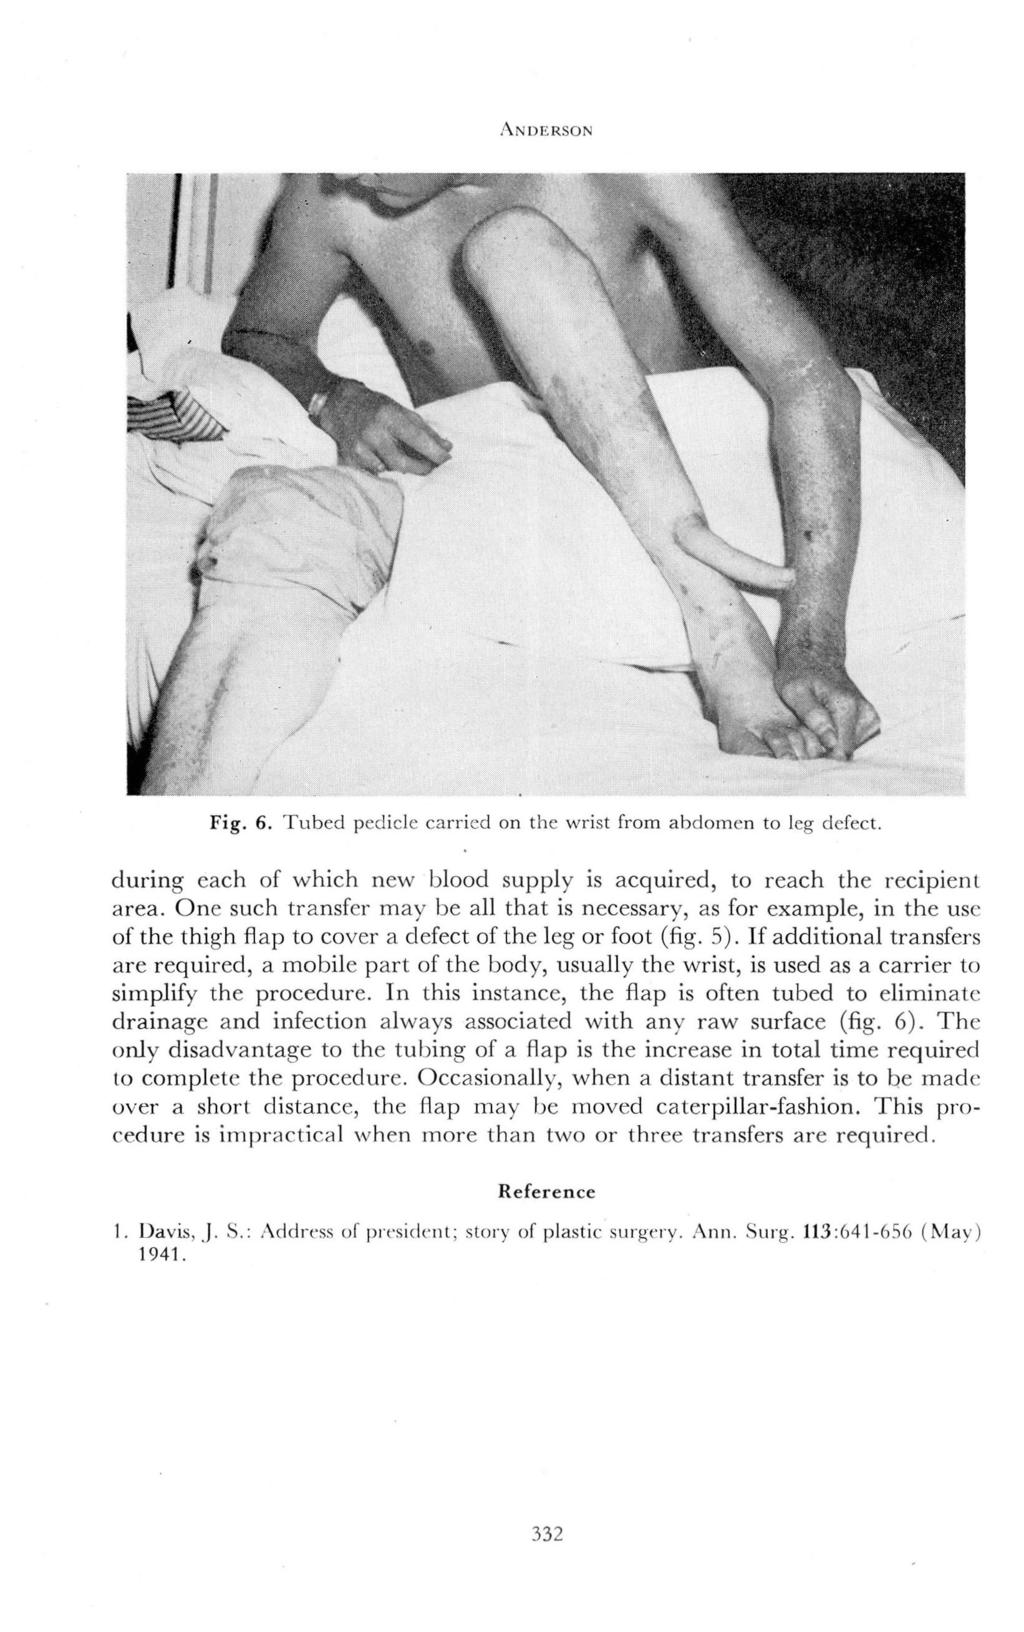 ANDERSON Fig. 6. Tubed pedicle carried on the wrist from abdomen to leg defect. during each of which new blood supply is acquired, to reach the recipient area.